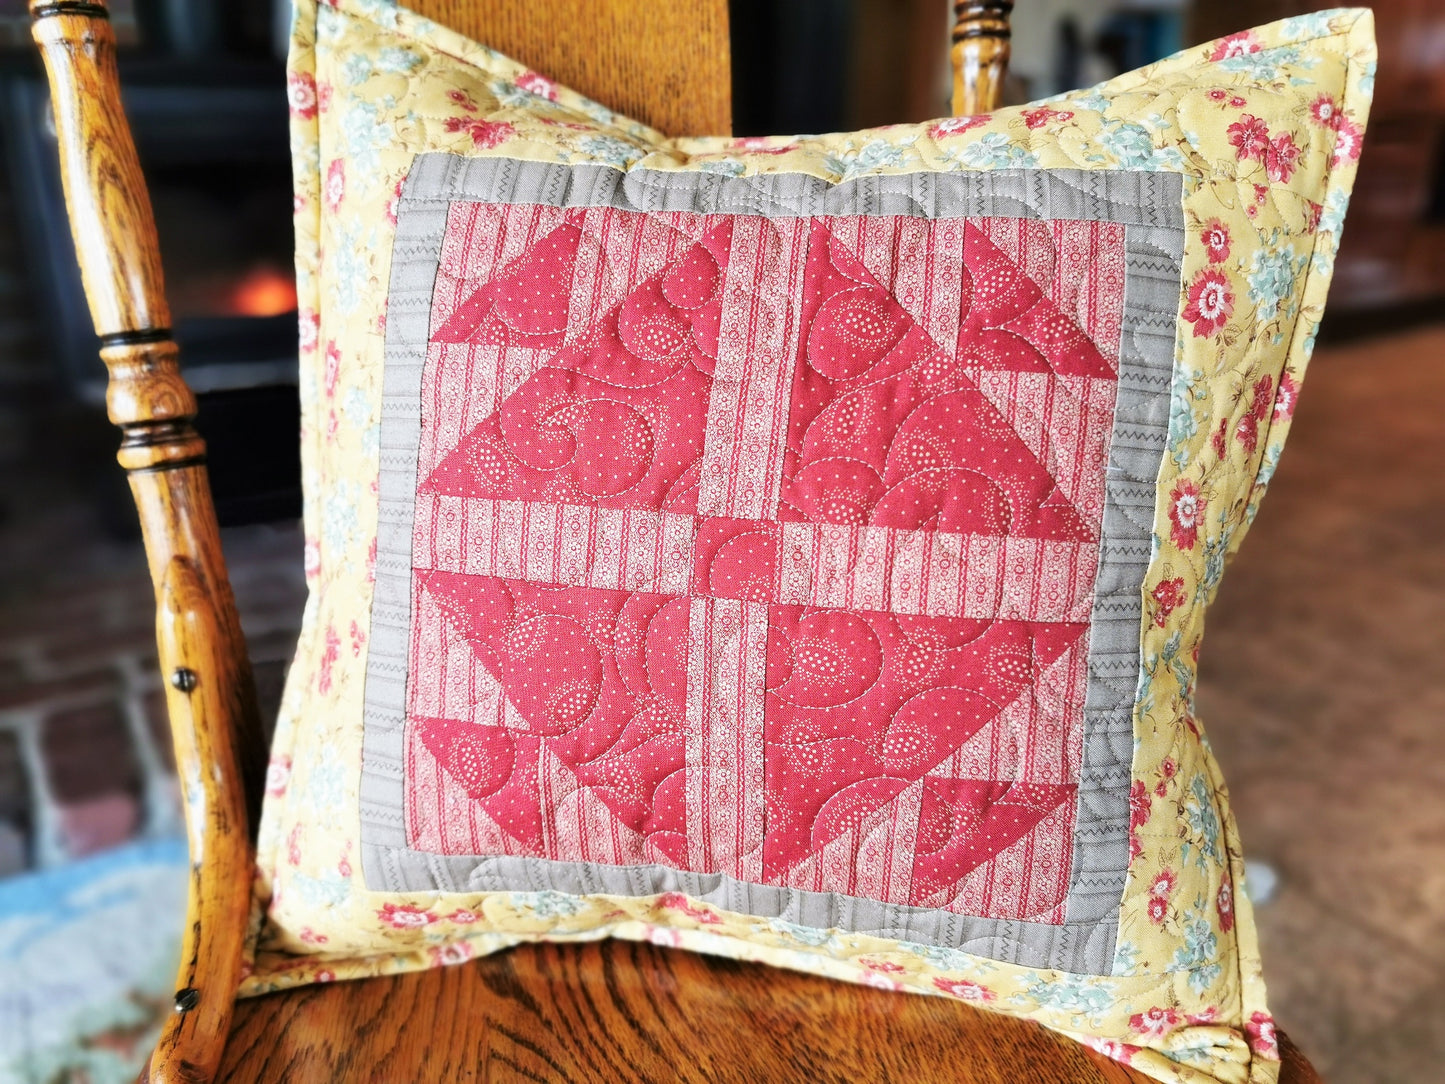 close up of pillow showing quilting